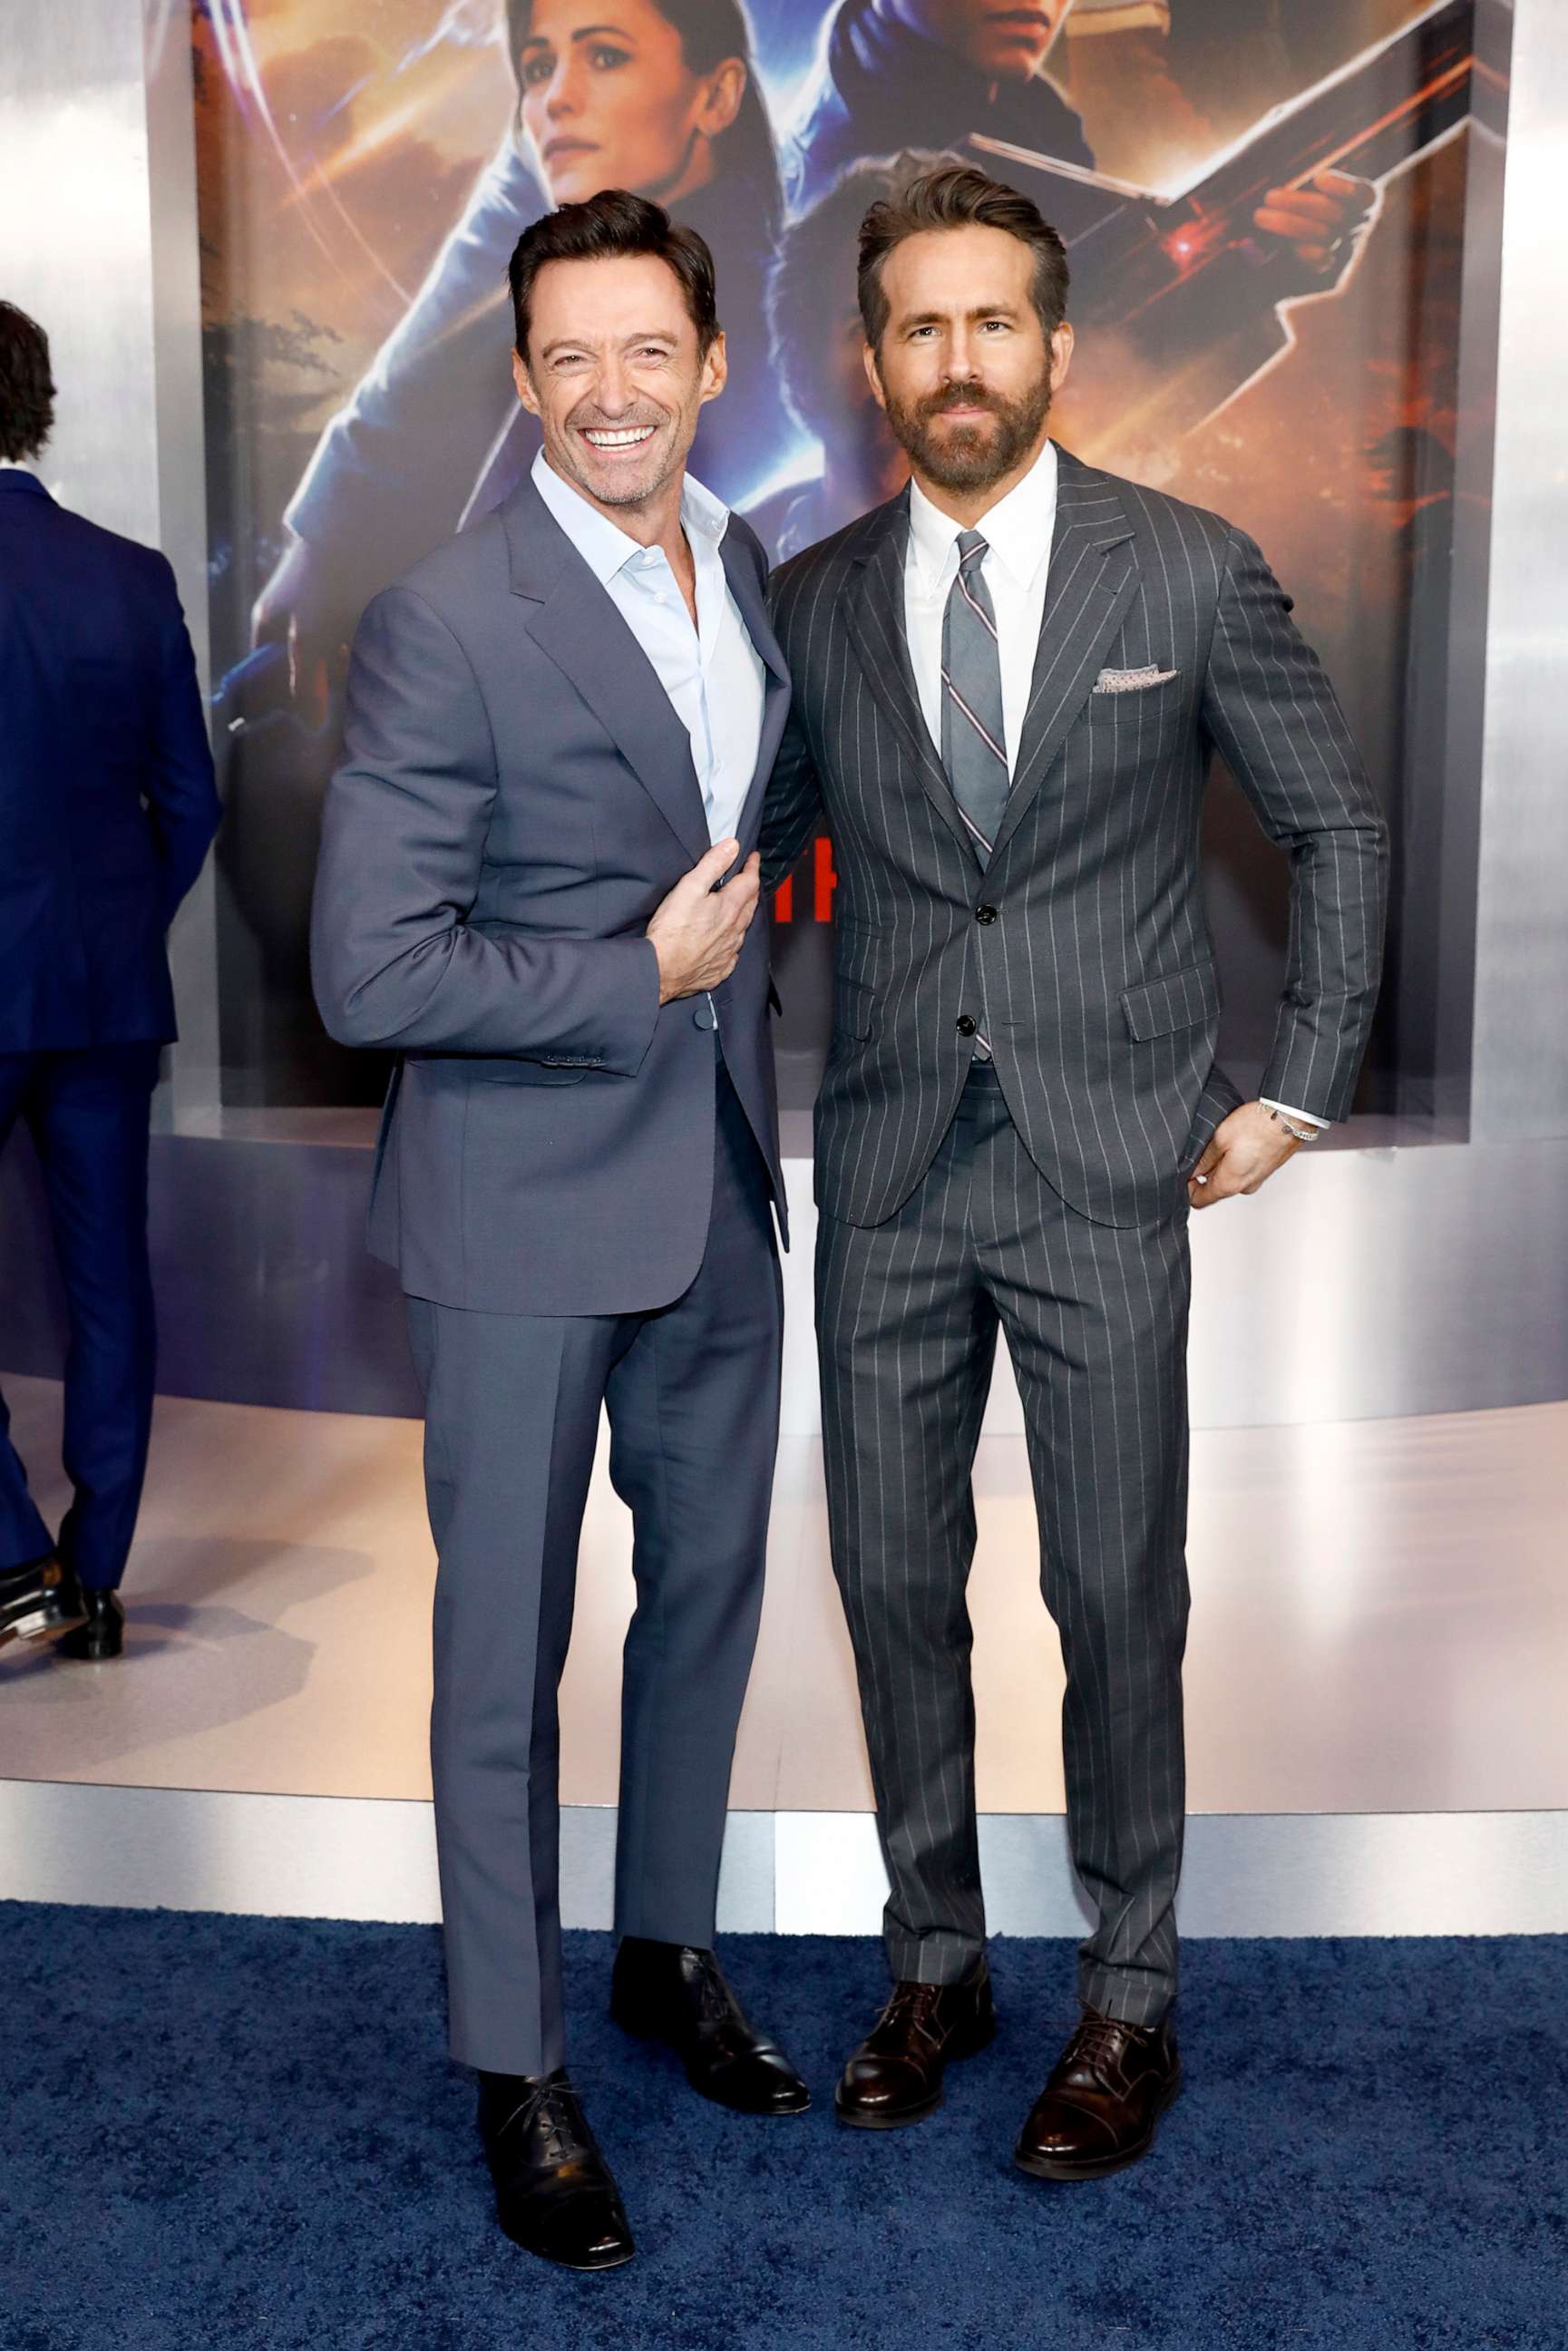 PHOTO: Hugh Jackman and Ryan Reynolds attend The Adam Project world premiere, Feb. 28, 2022, in New York City.